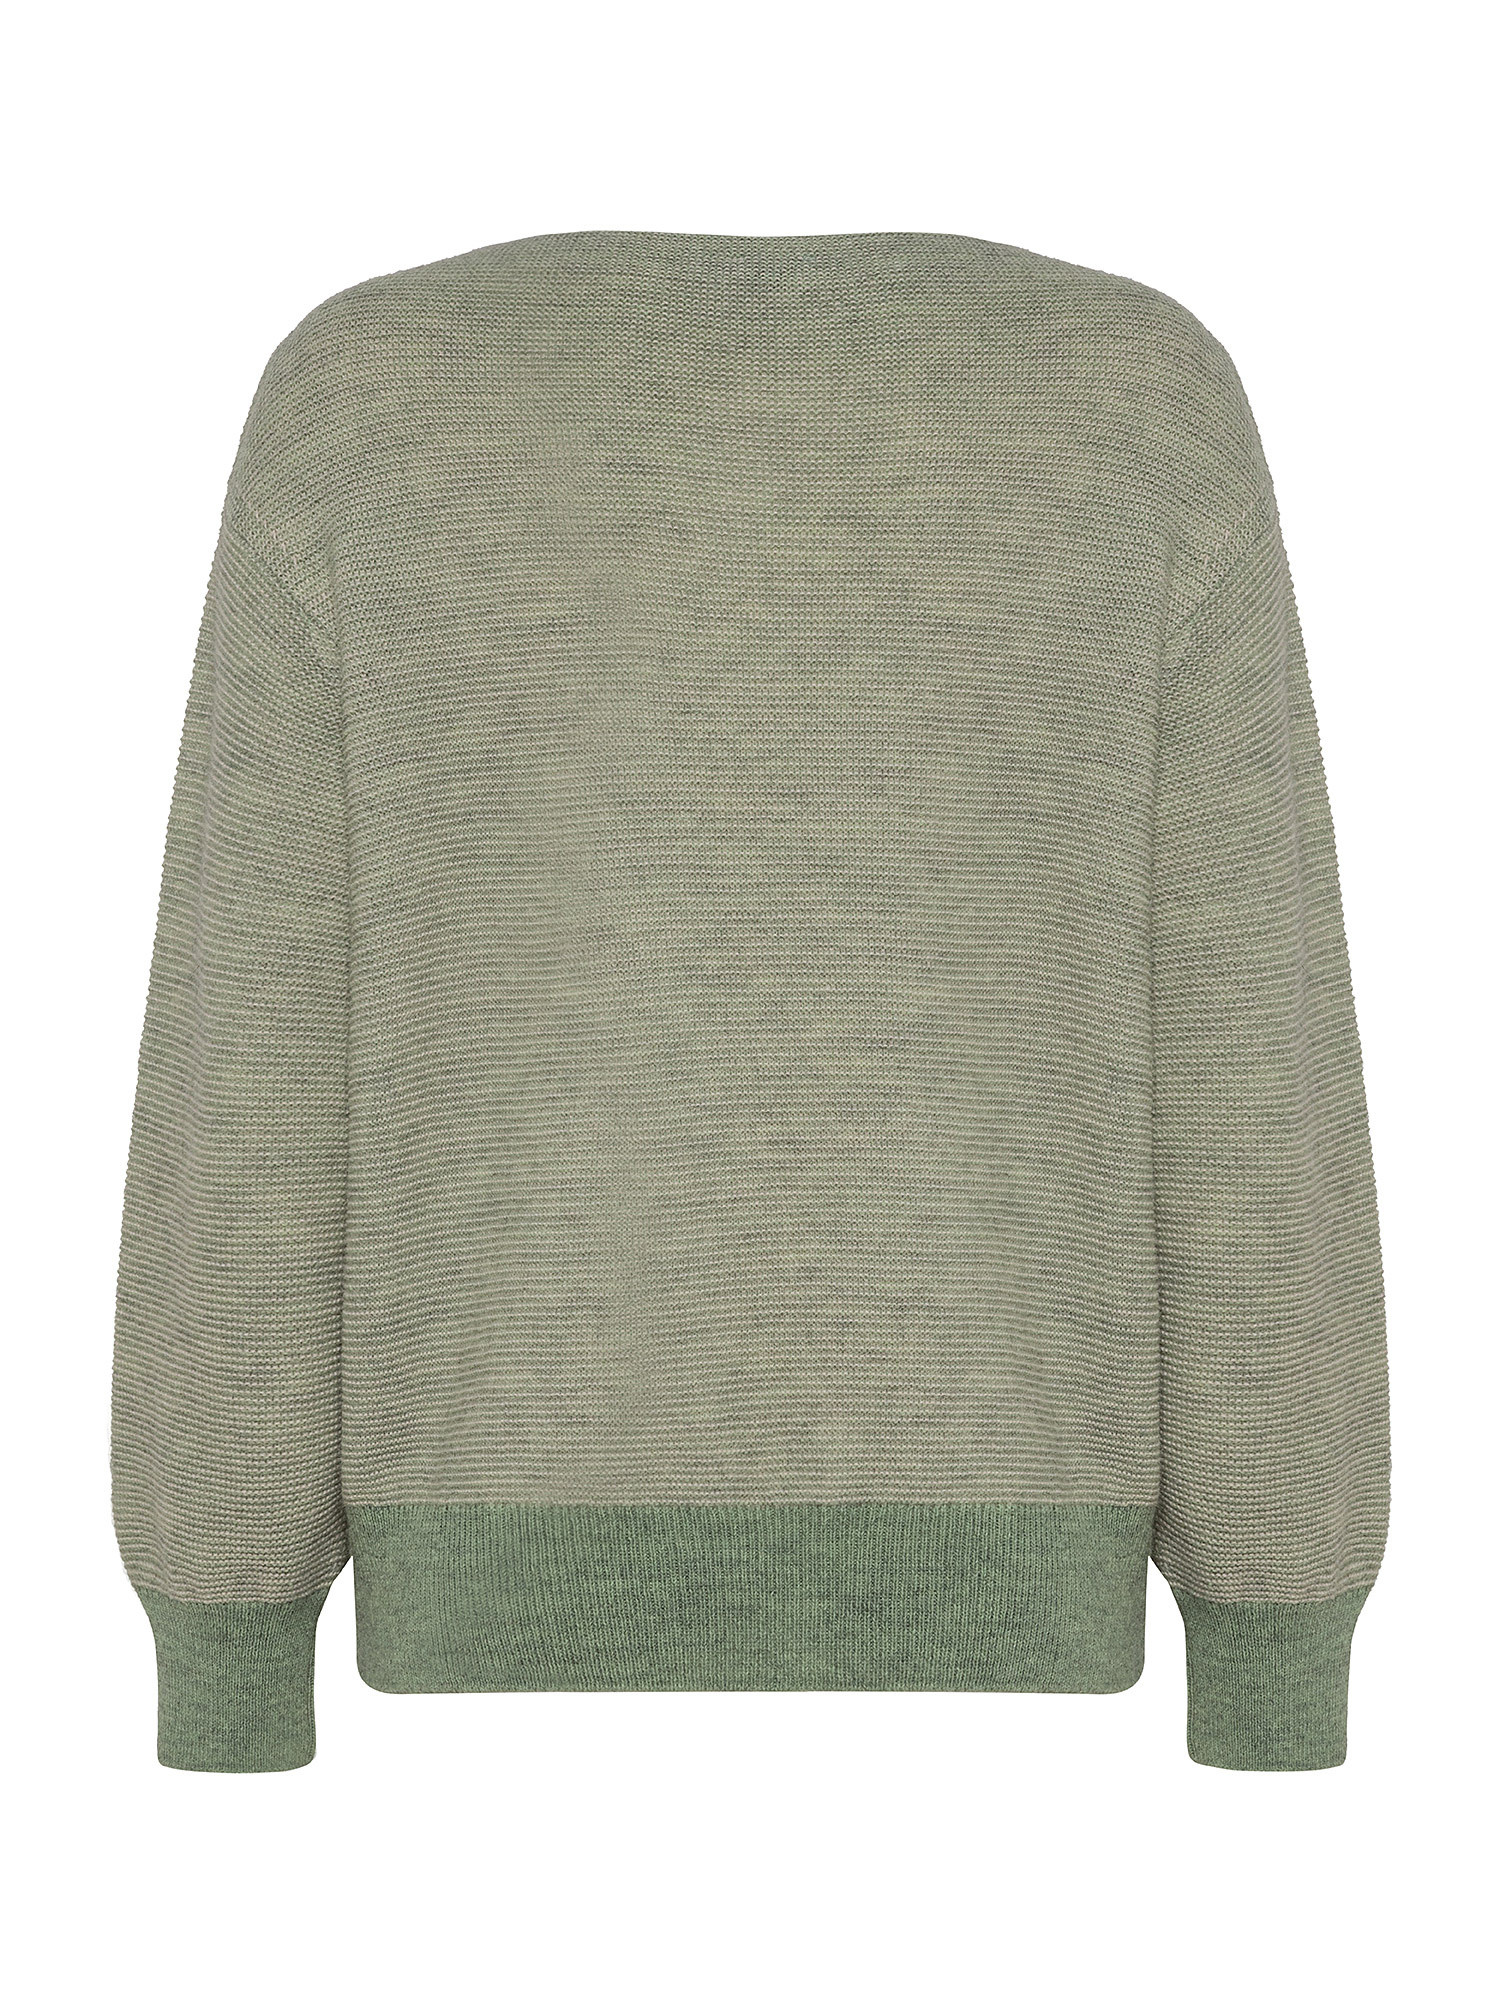 Two Tone Sweater, Green, large image number 1